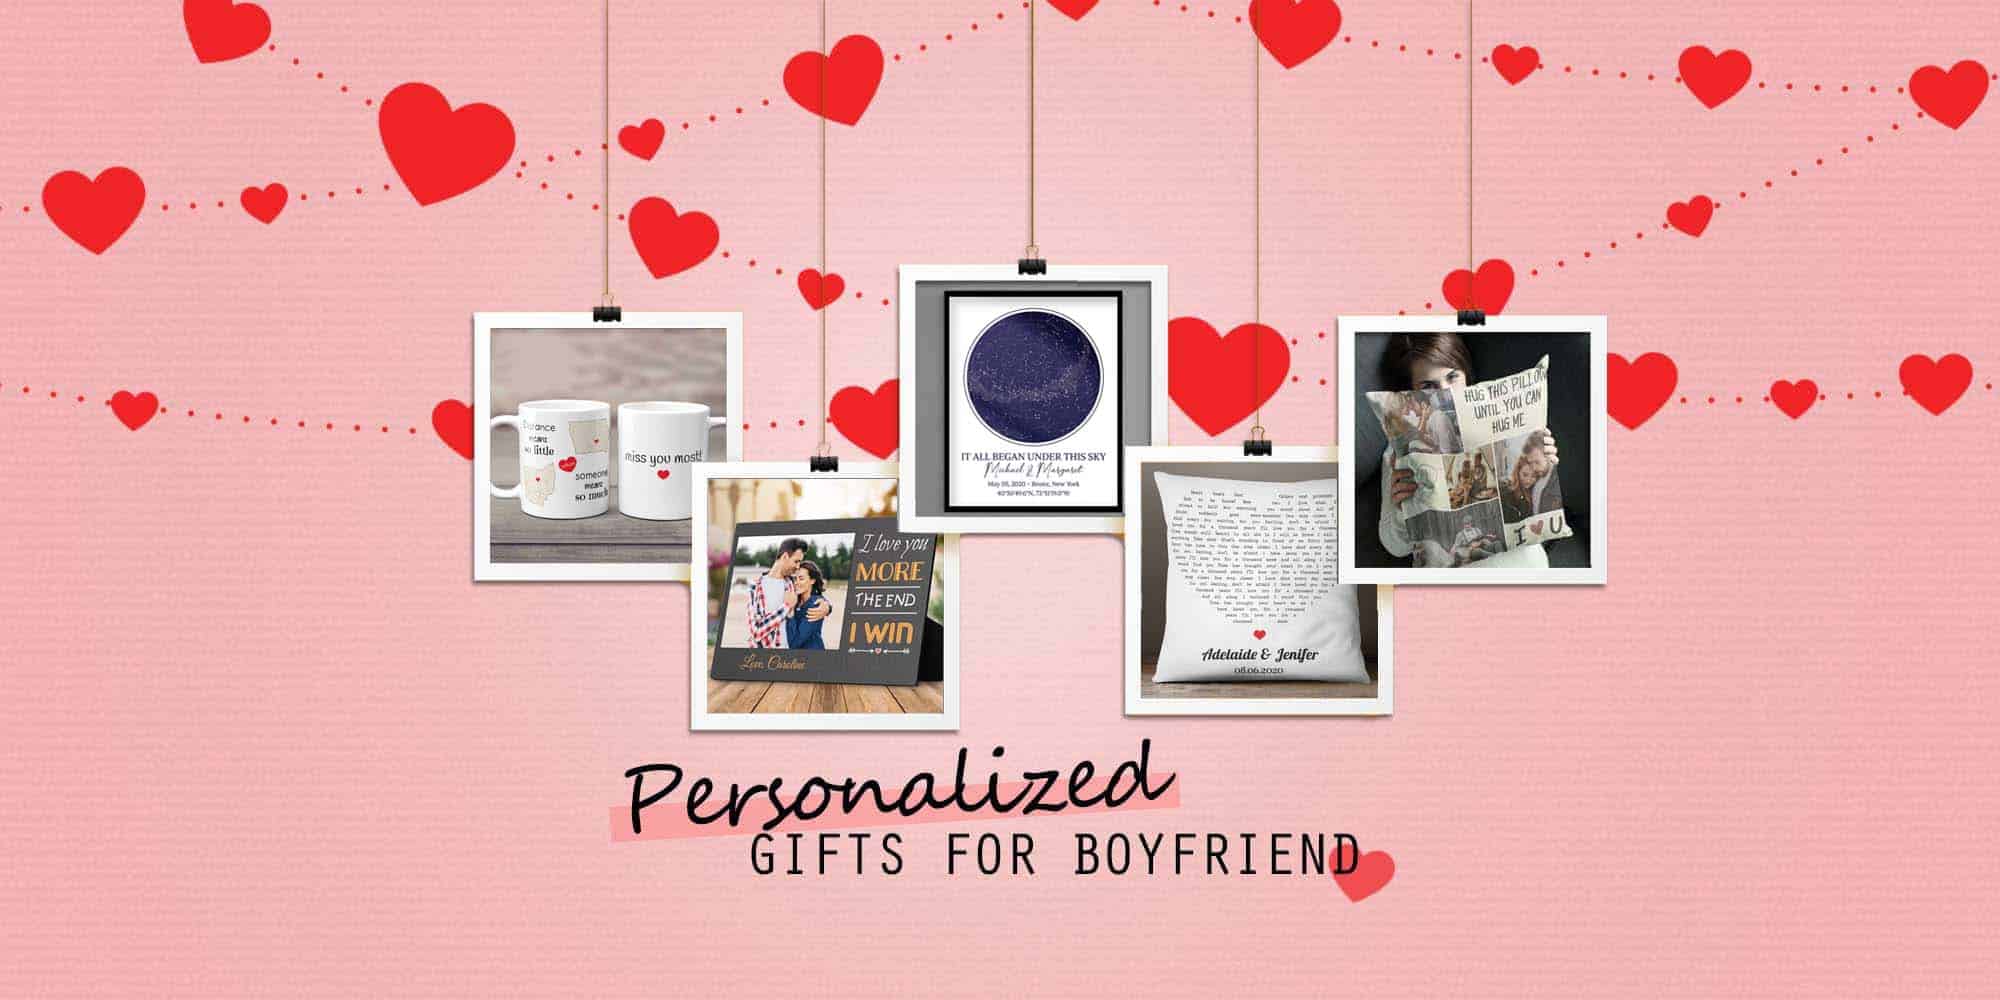 35 Thoughtful Personalized Gifts for Boyfriend to Make Him Feel Special (2022)